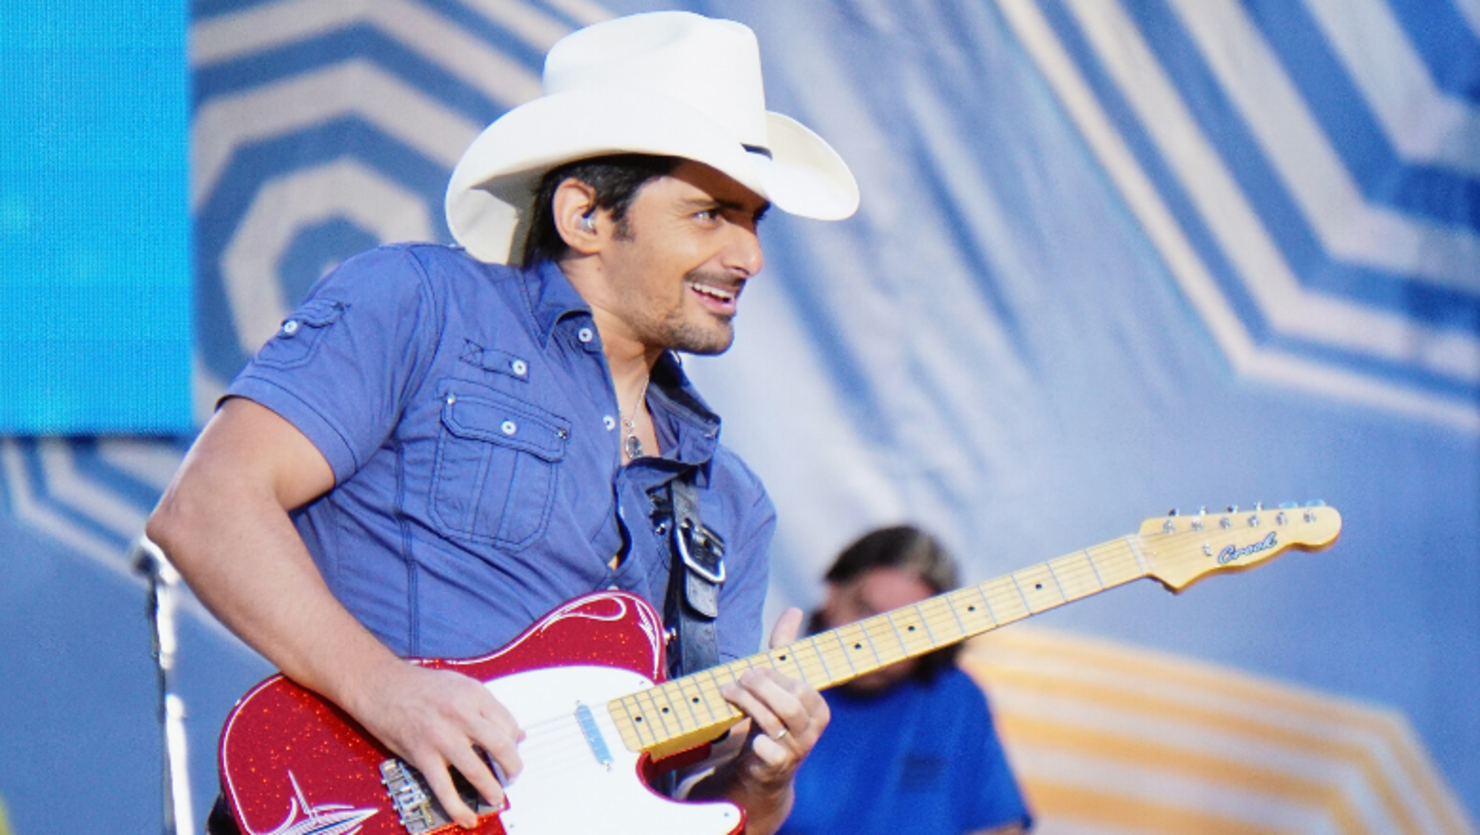 Brad Paisley And His Band Will Reunite On Stage For A Livestream Show